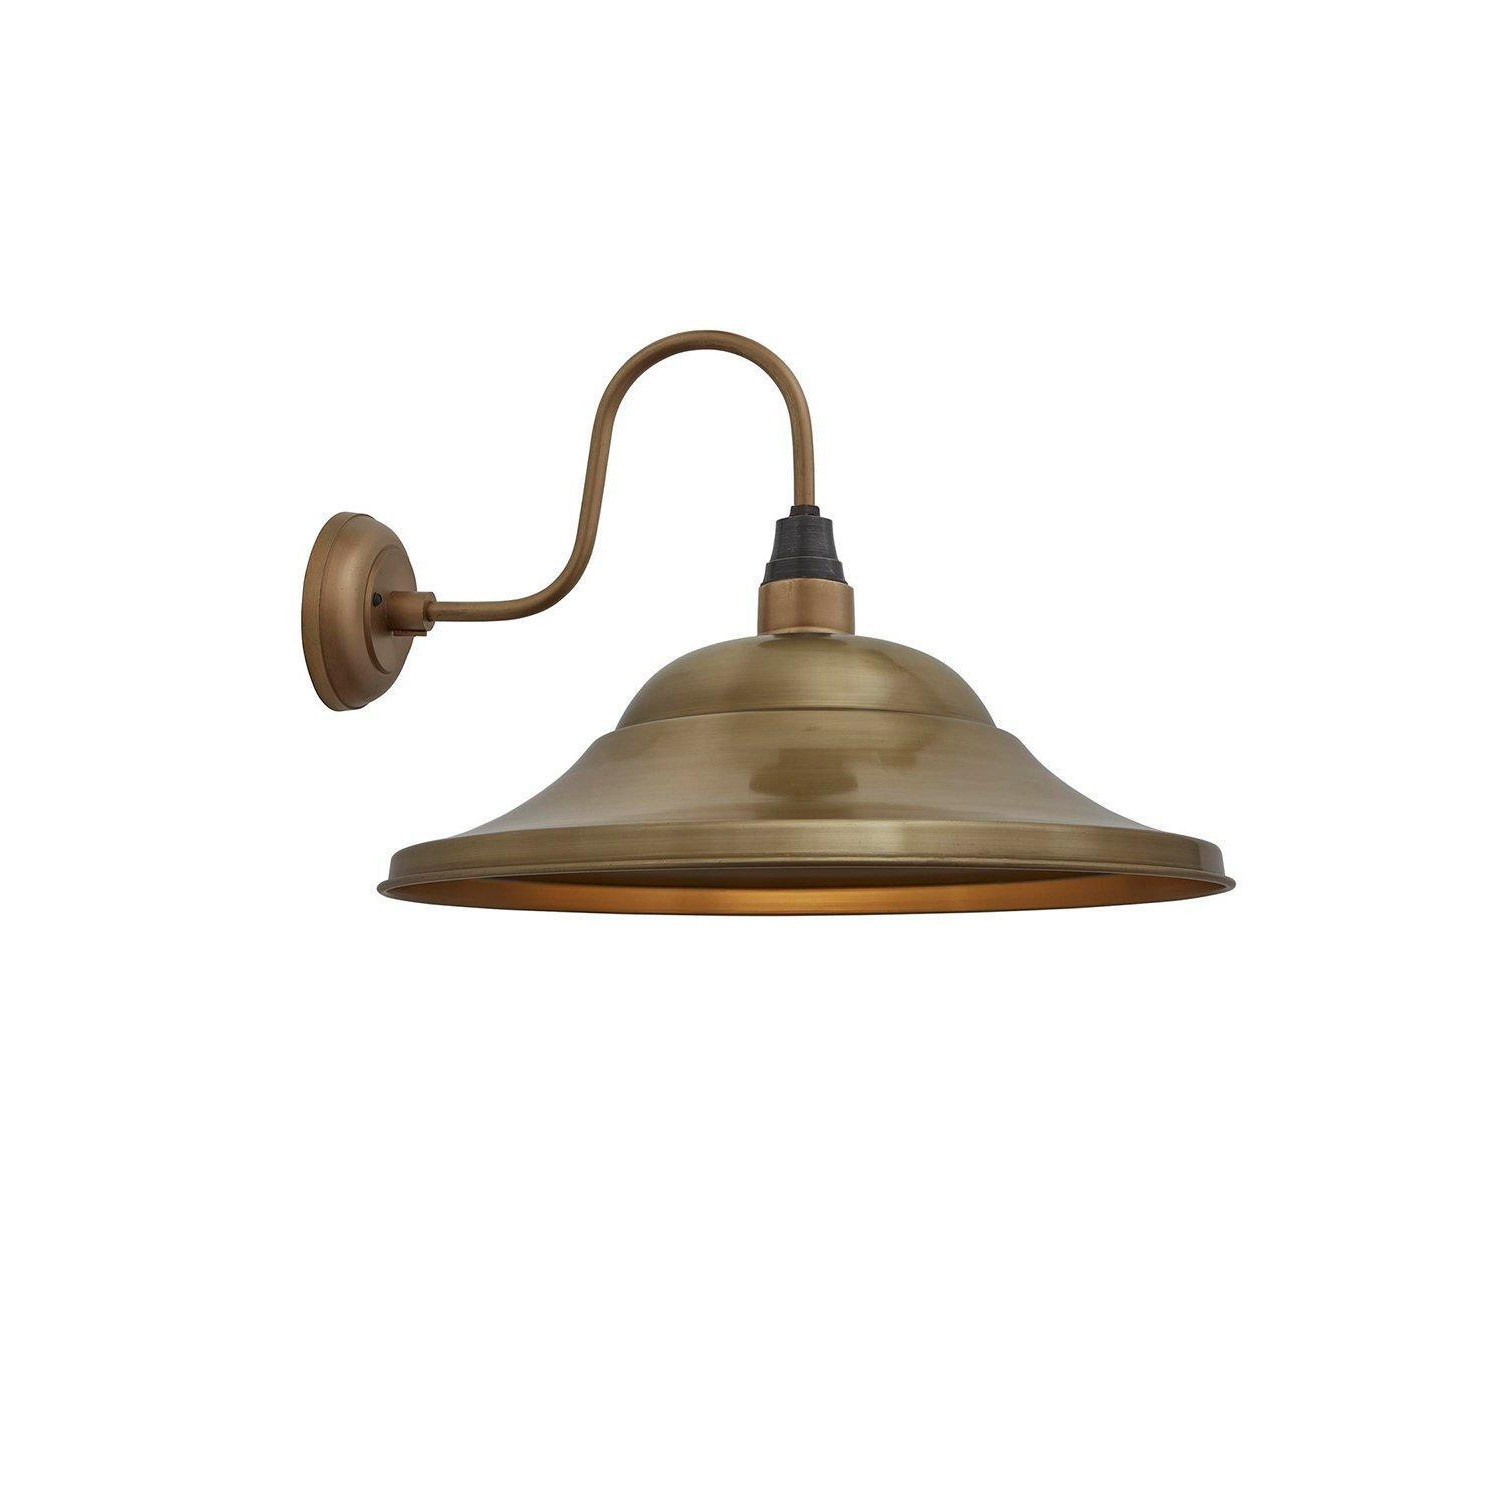 Swan Neck Giant Hat Wall Light, 21 Inch, Brass - image 1